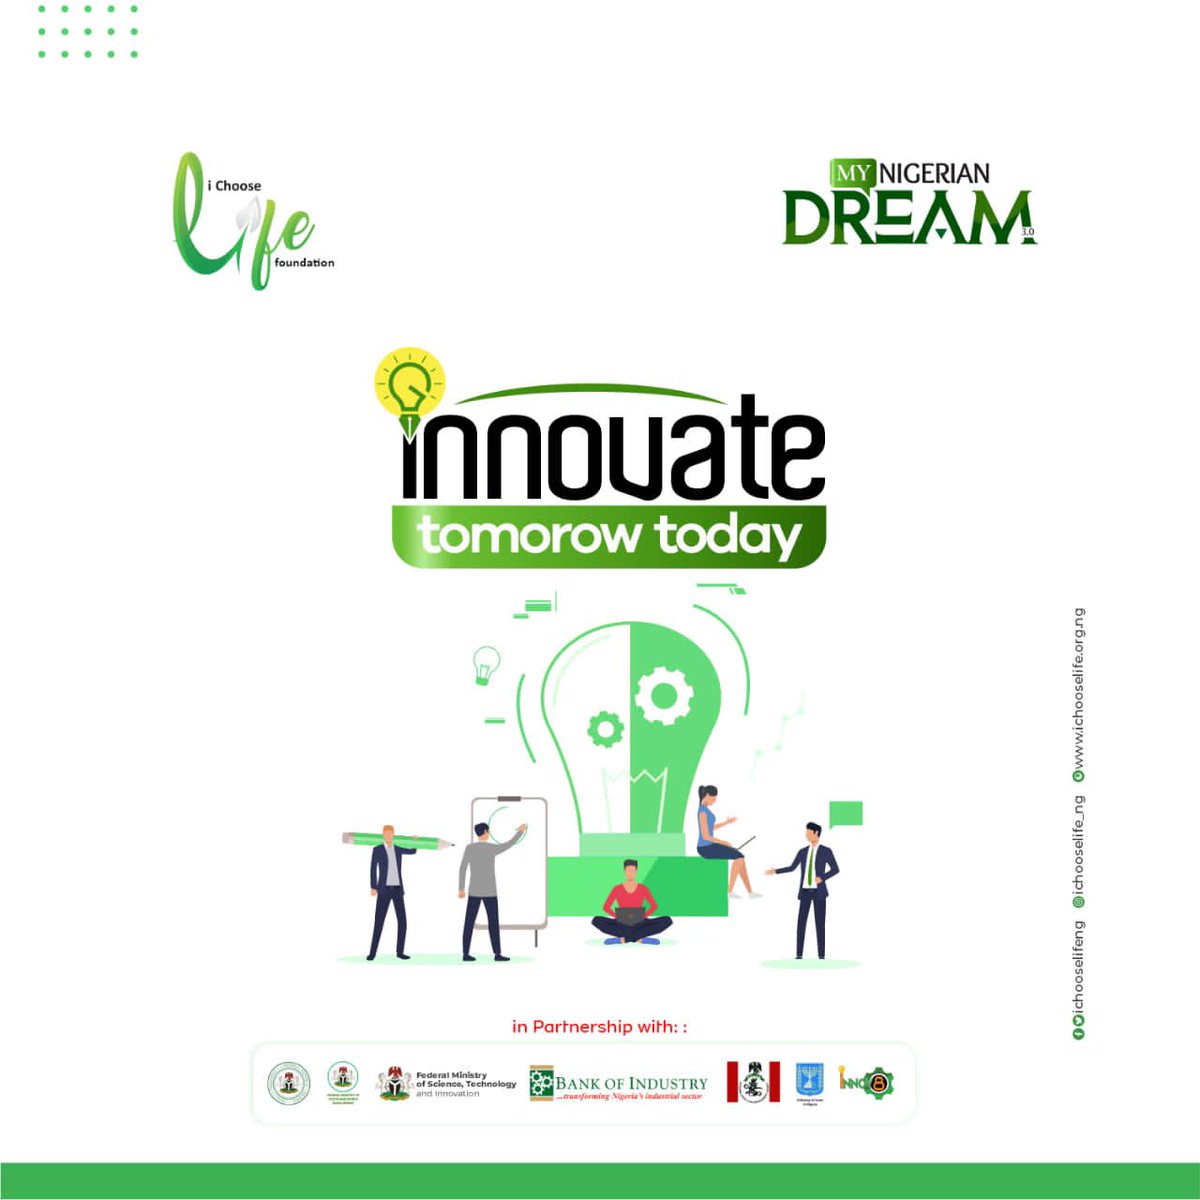 The coordinator of the I Choose Life Foundation is inviting the general online public to #MyNigerianDream 3.0 to carry the conversation on innovating for tomorrow today. To Join the conversation click on the link us02web.zoom.us/meeting/regist… and follow @ichooselifeng, see you there